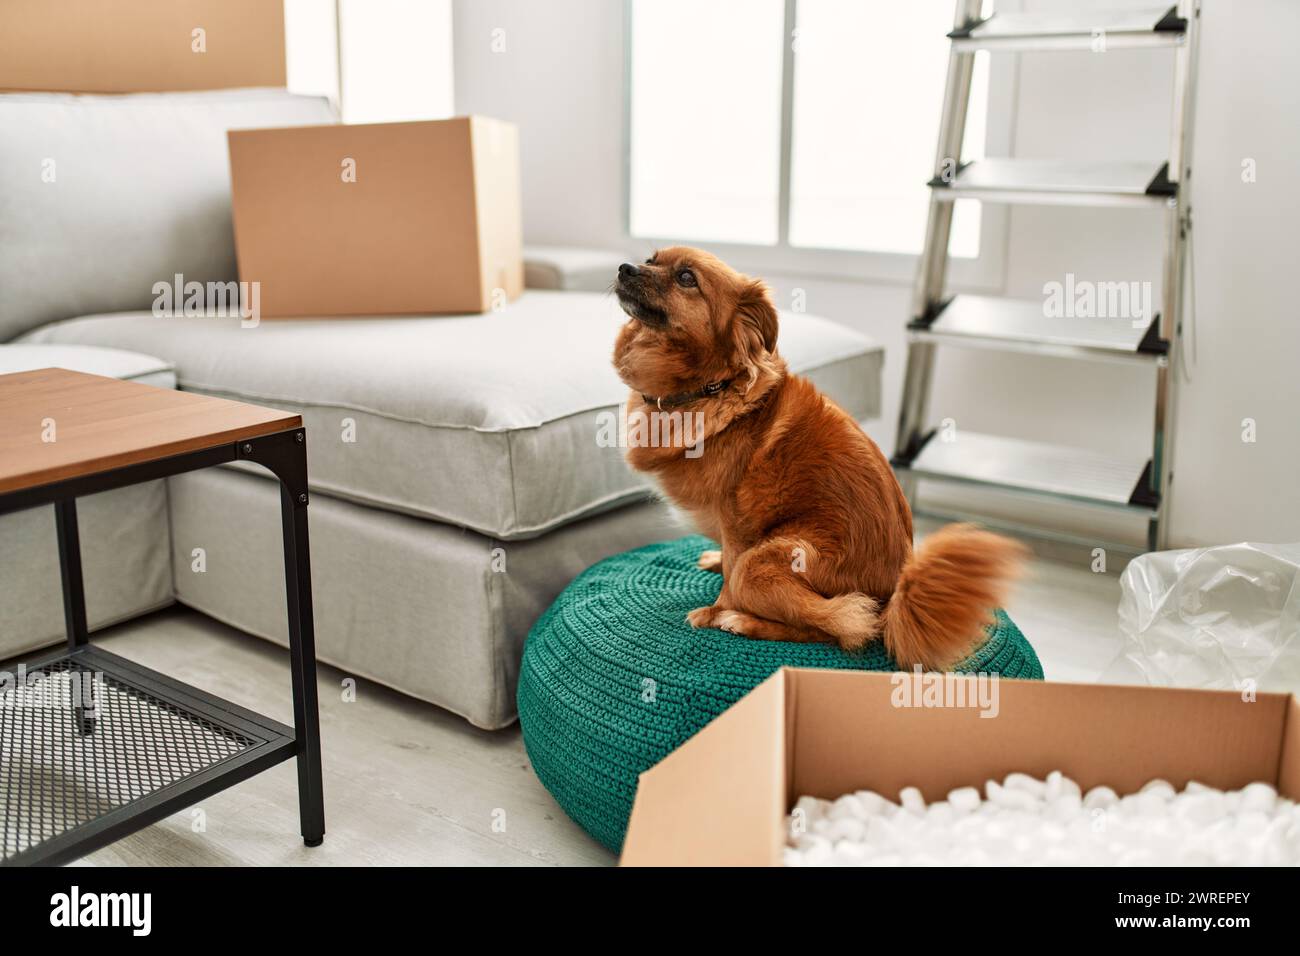 A dog sits on a pouf in a cluttered living room with boxes during moving day, evoking a sense of home and transition. Stock Photo